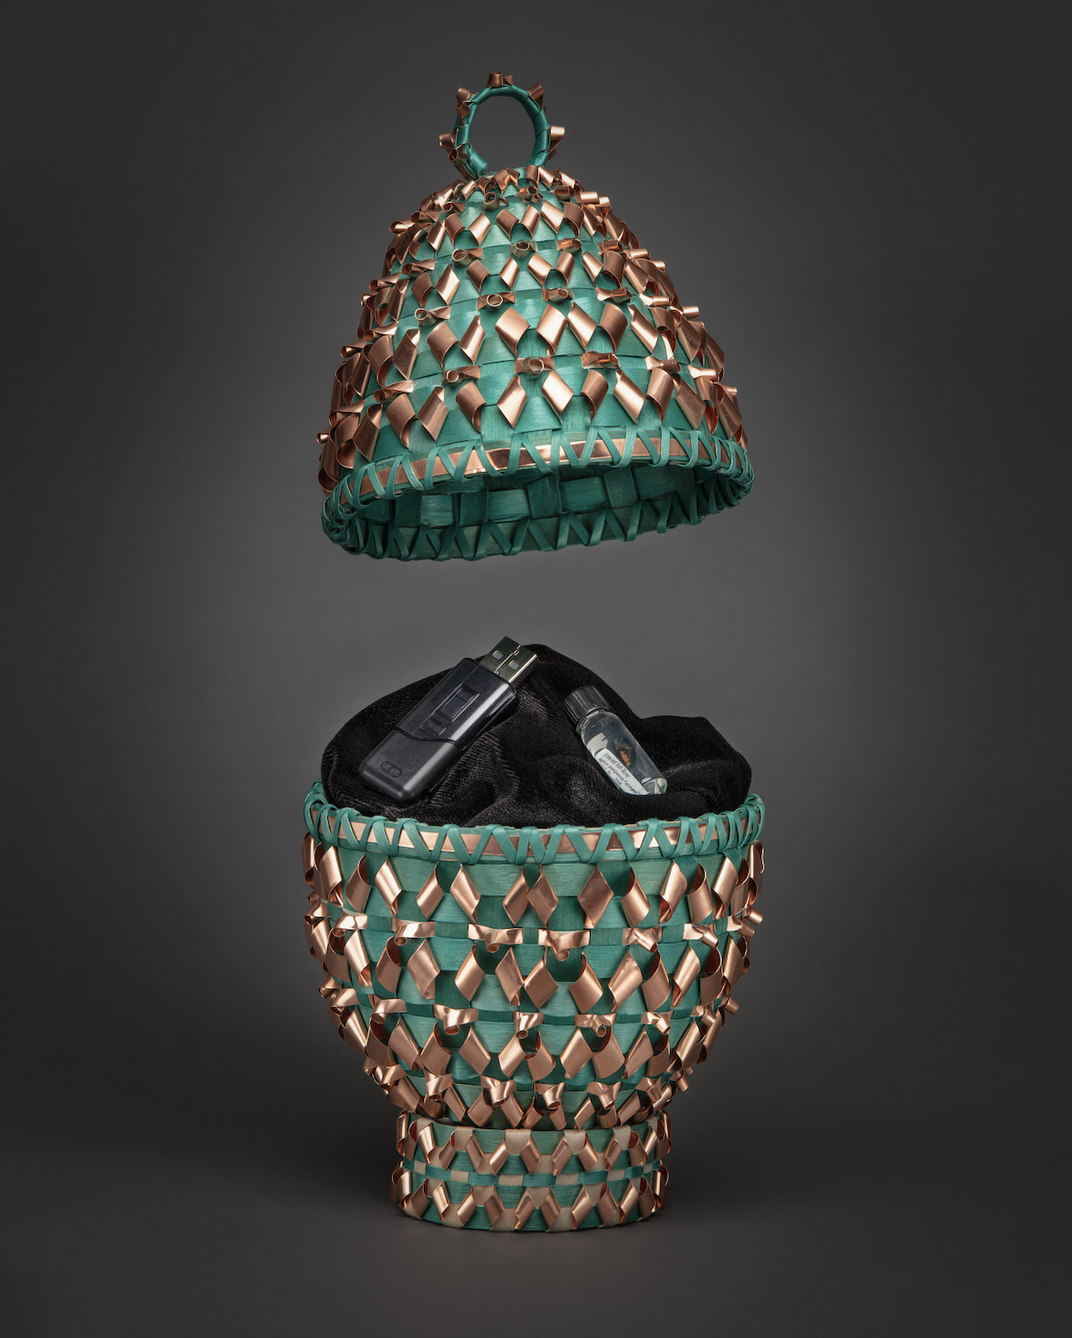 Greed basket in the shape of an egg with coper and silver embellishments open to reveal a flash drive inside.